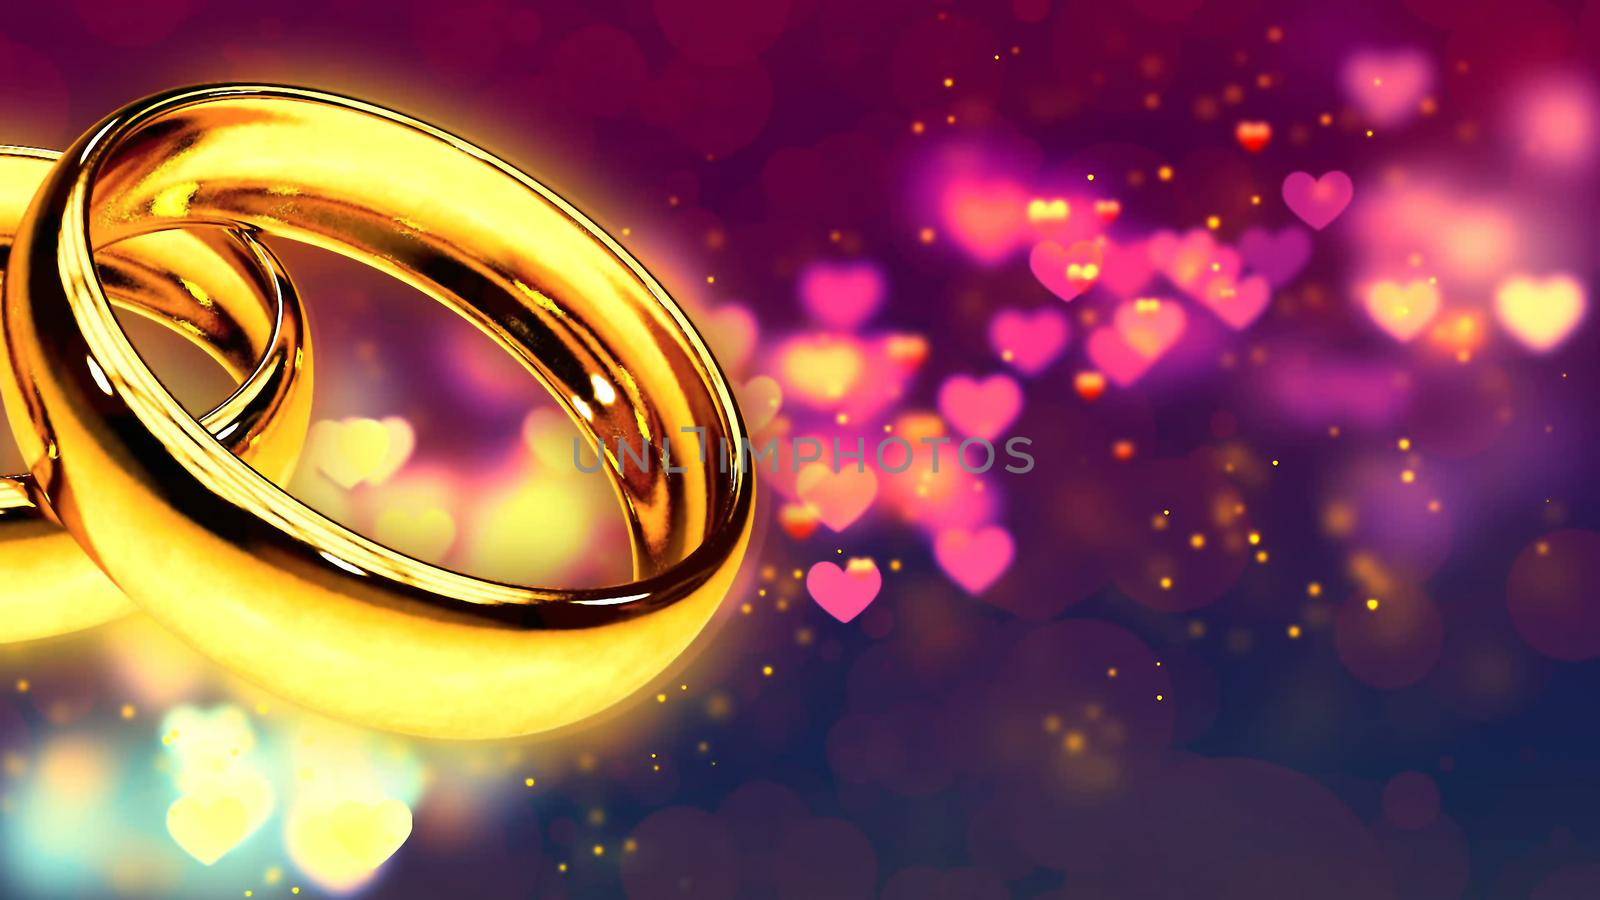 Abstract Background with two gold rings